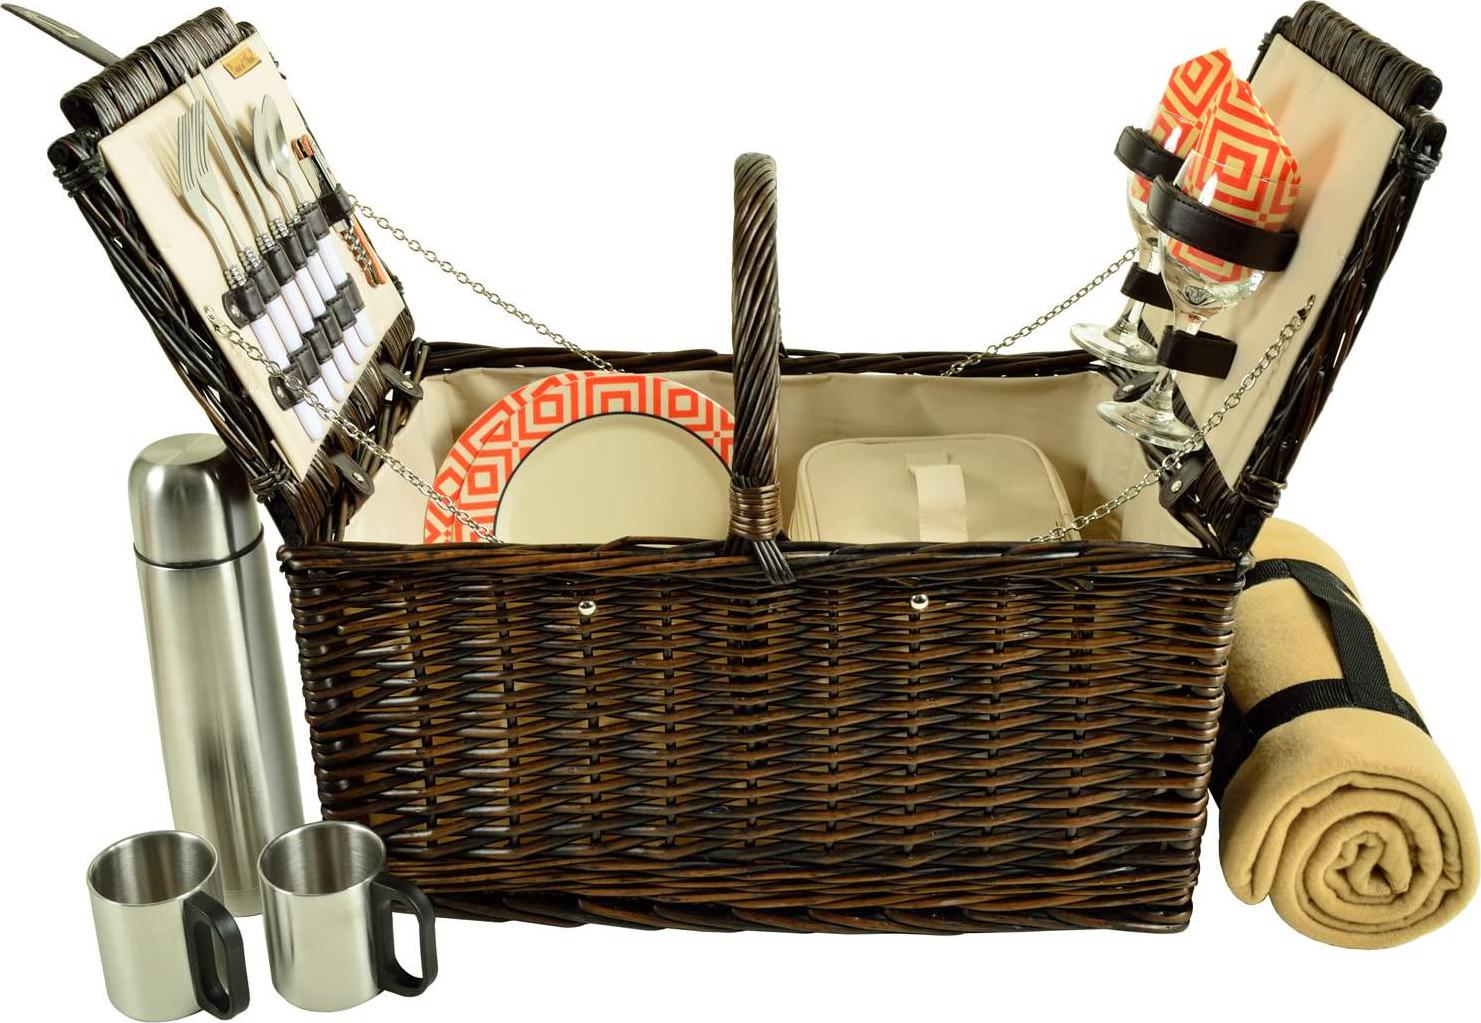 Picnic at Ascot Surrey Willow Picnic Basket With Blanket And Coffee Set, Brown Wicker/Diamond Orange-